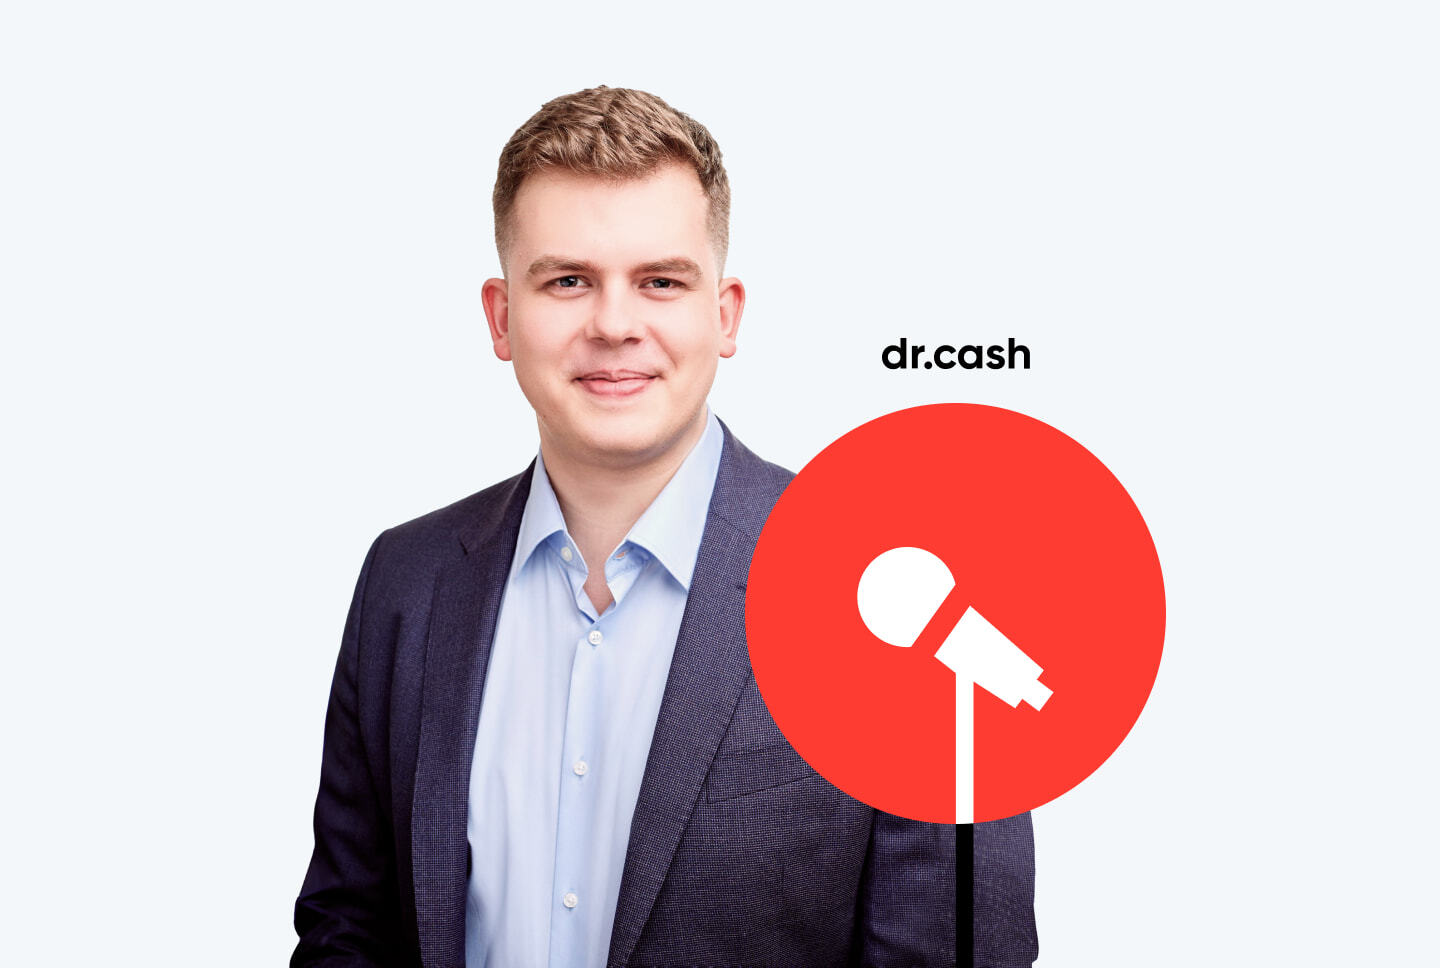 How to run profitable ad campaigns: RichAds CMO interview for Dr.Cash